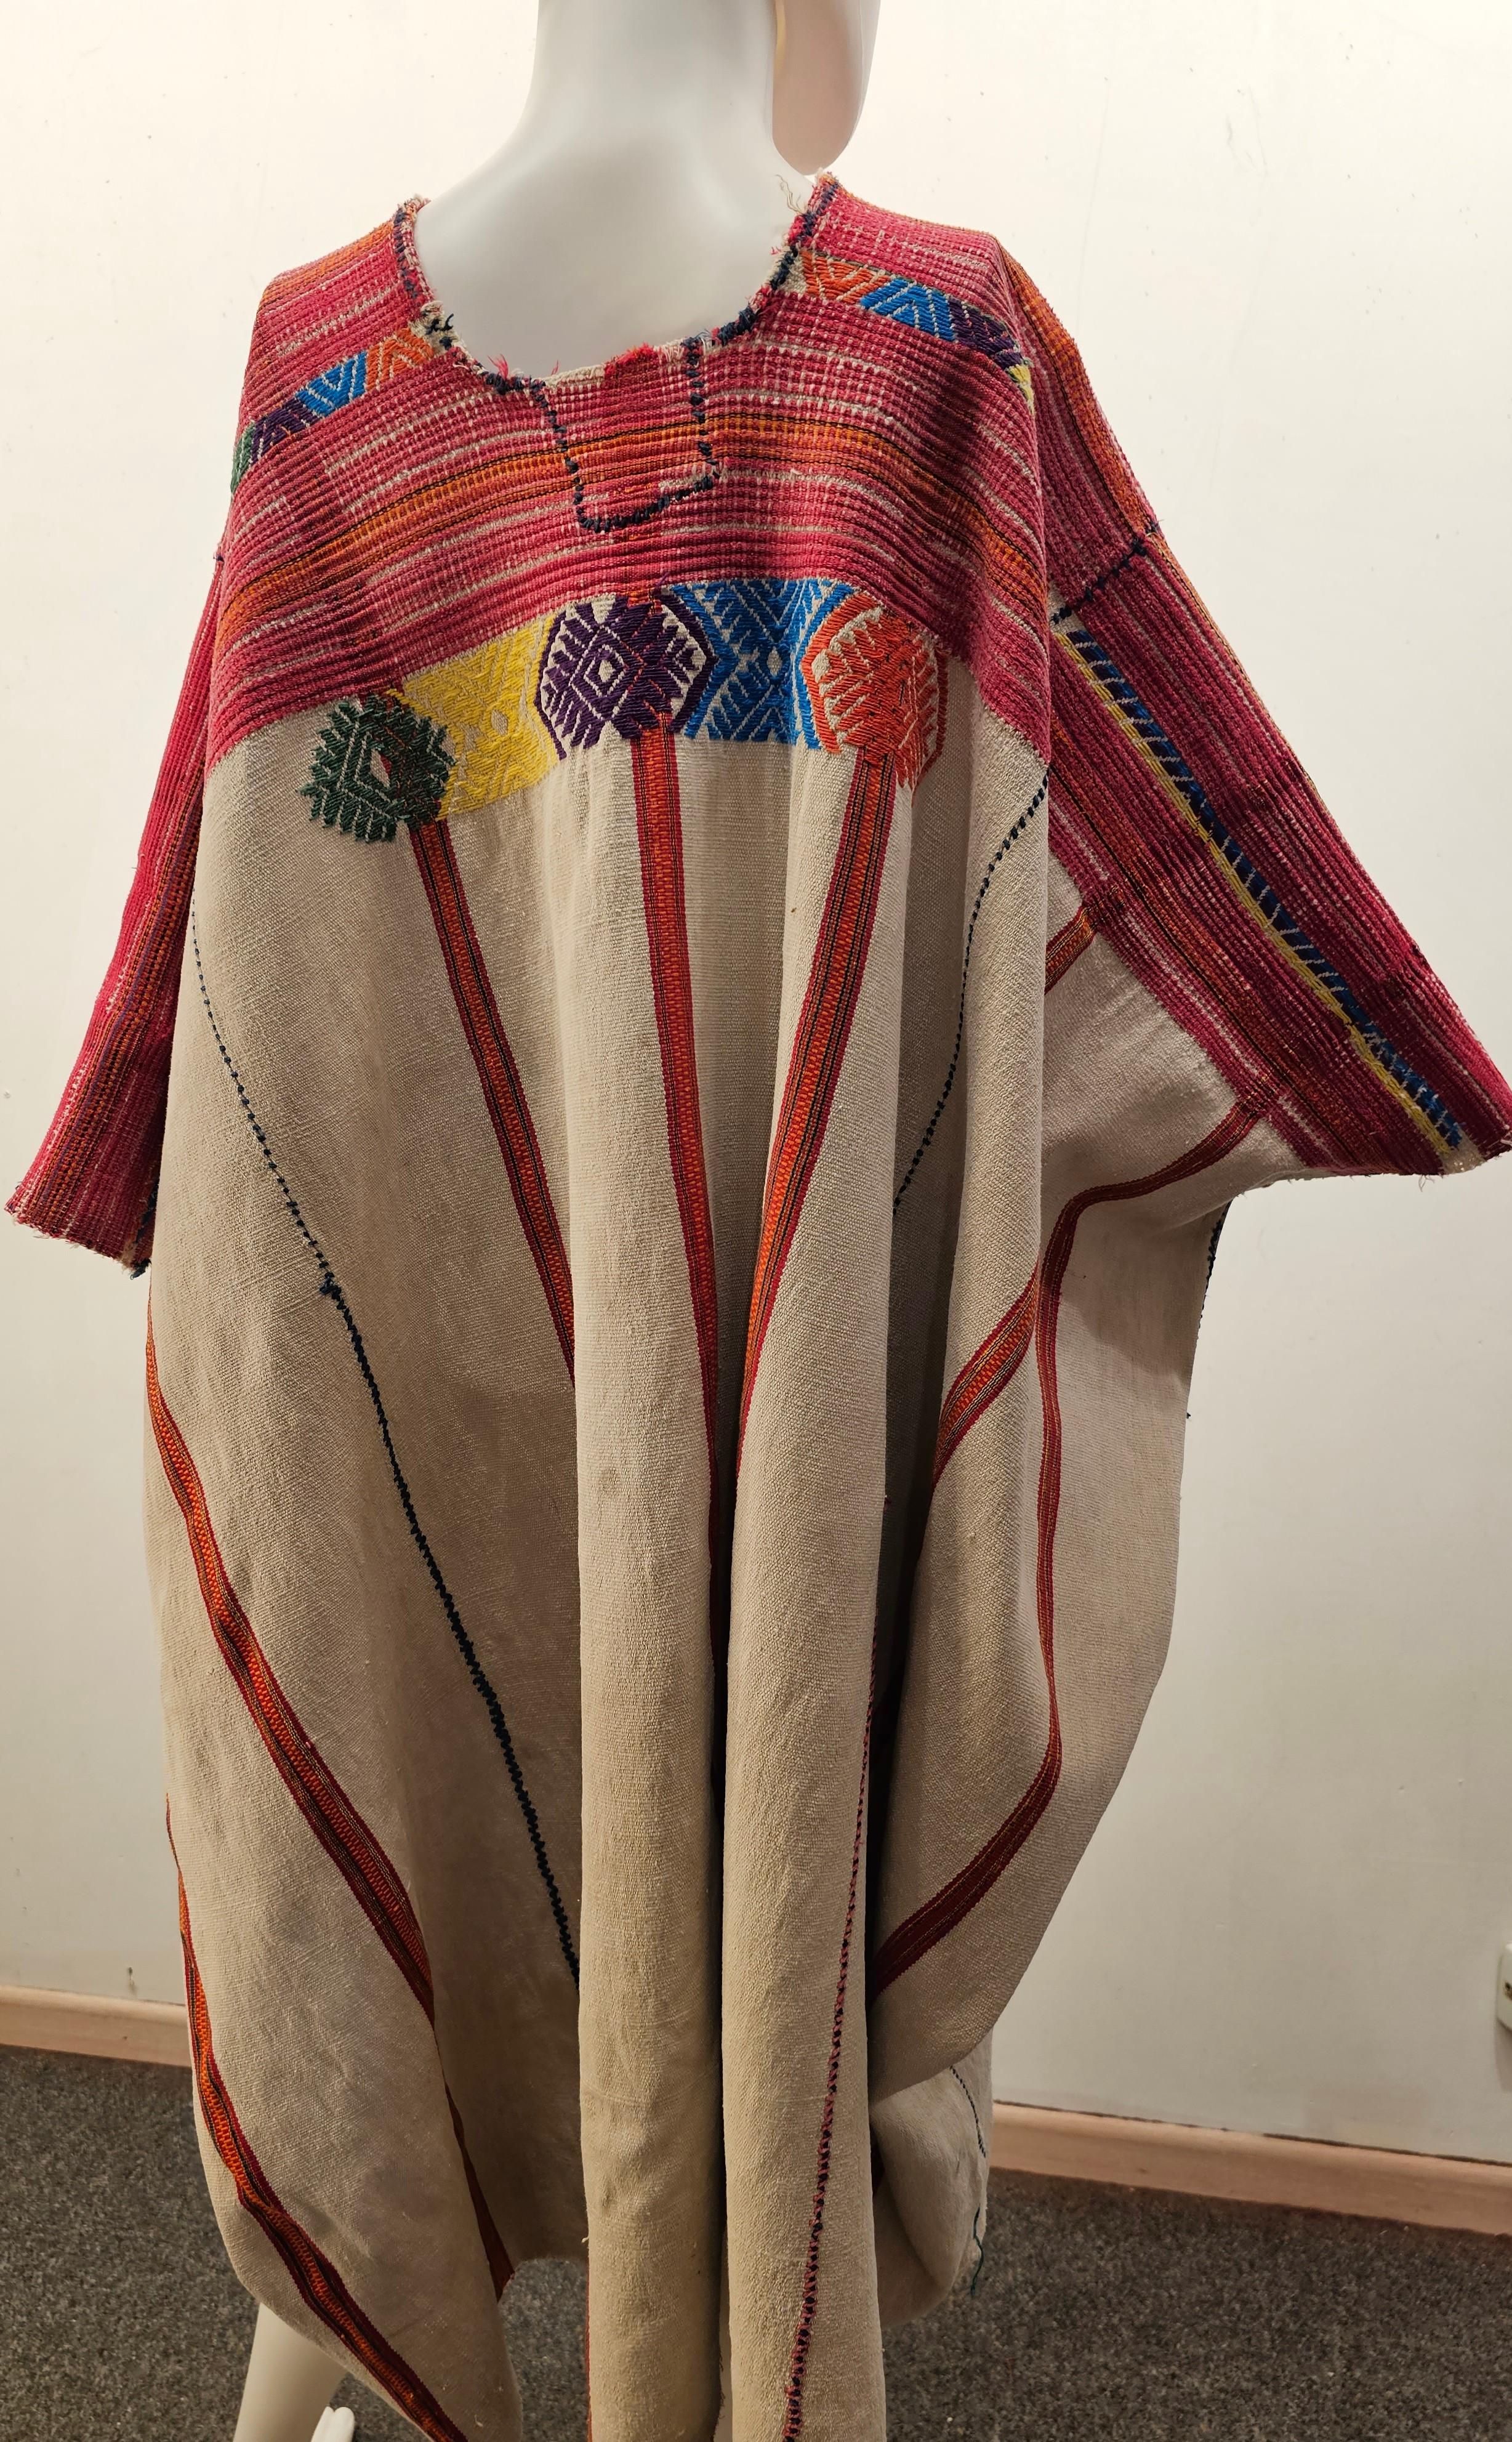 Vintage South American Handwoven Textile Made into a Poncho in Ivory, Red, Blue In Good Condition For Sale In Barrington, IL